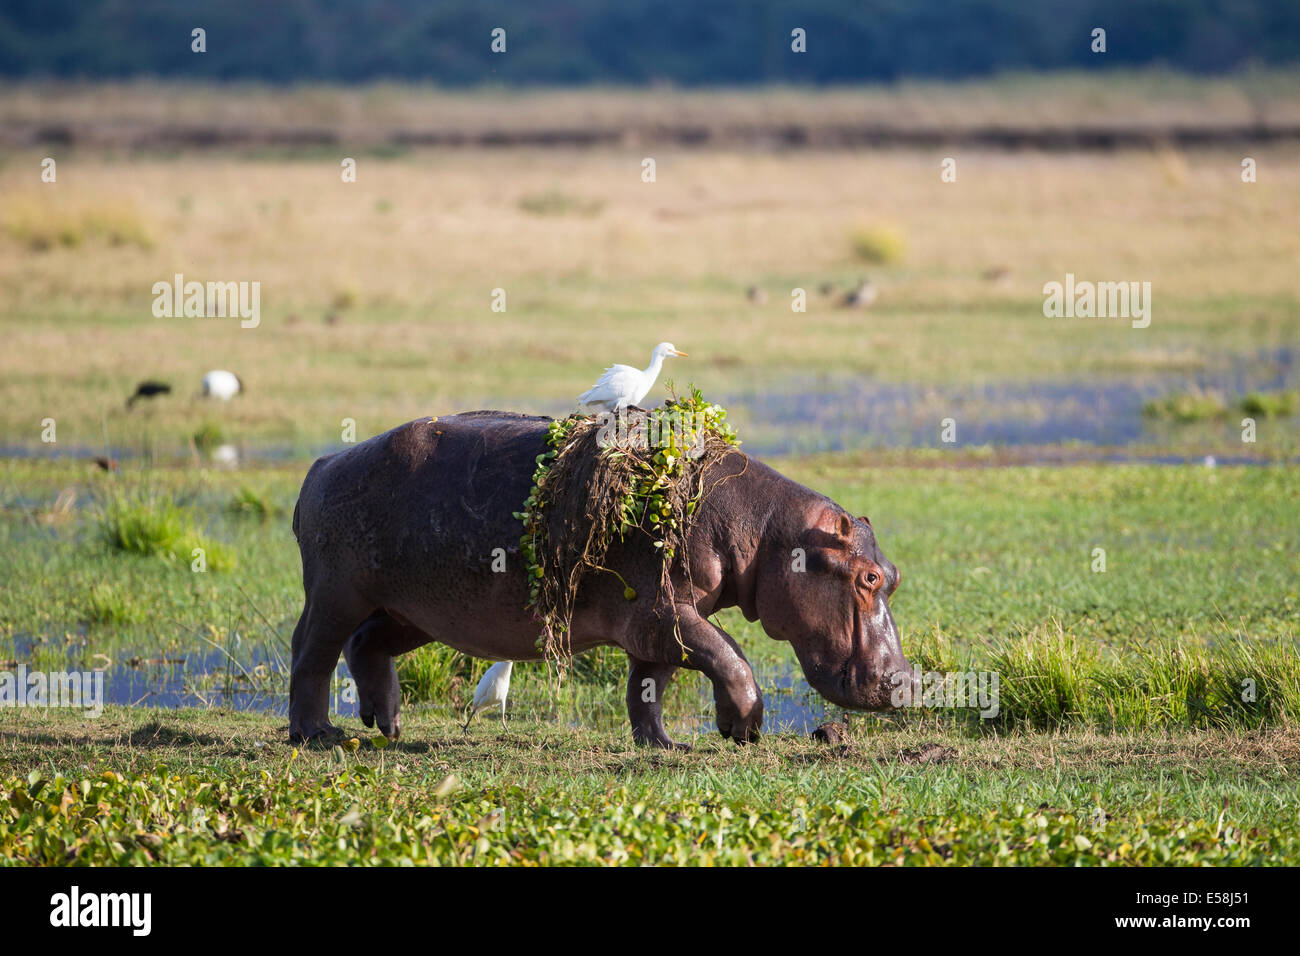 Hippopotamus walking out of water with Hyacinth Weed and Cattle Egret on back Stock Photo